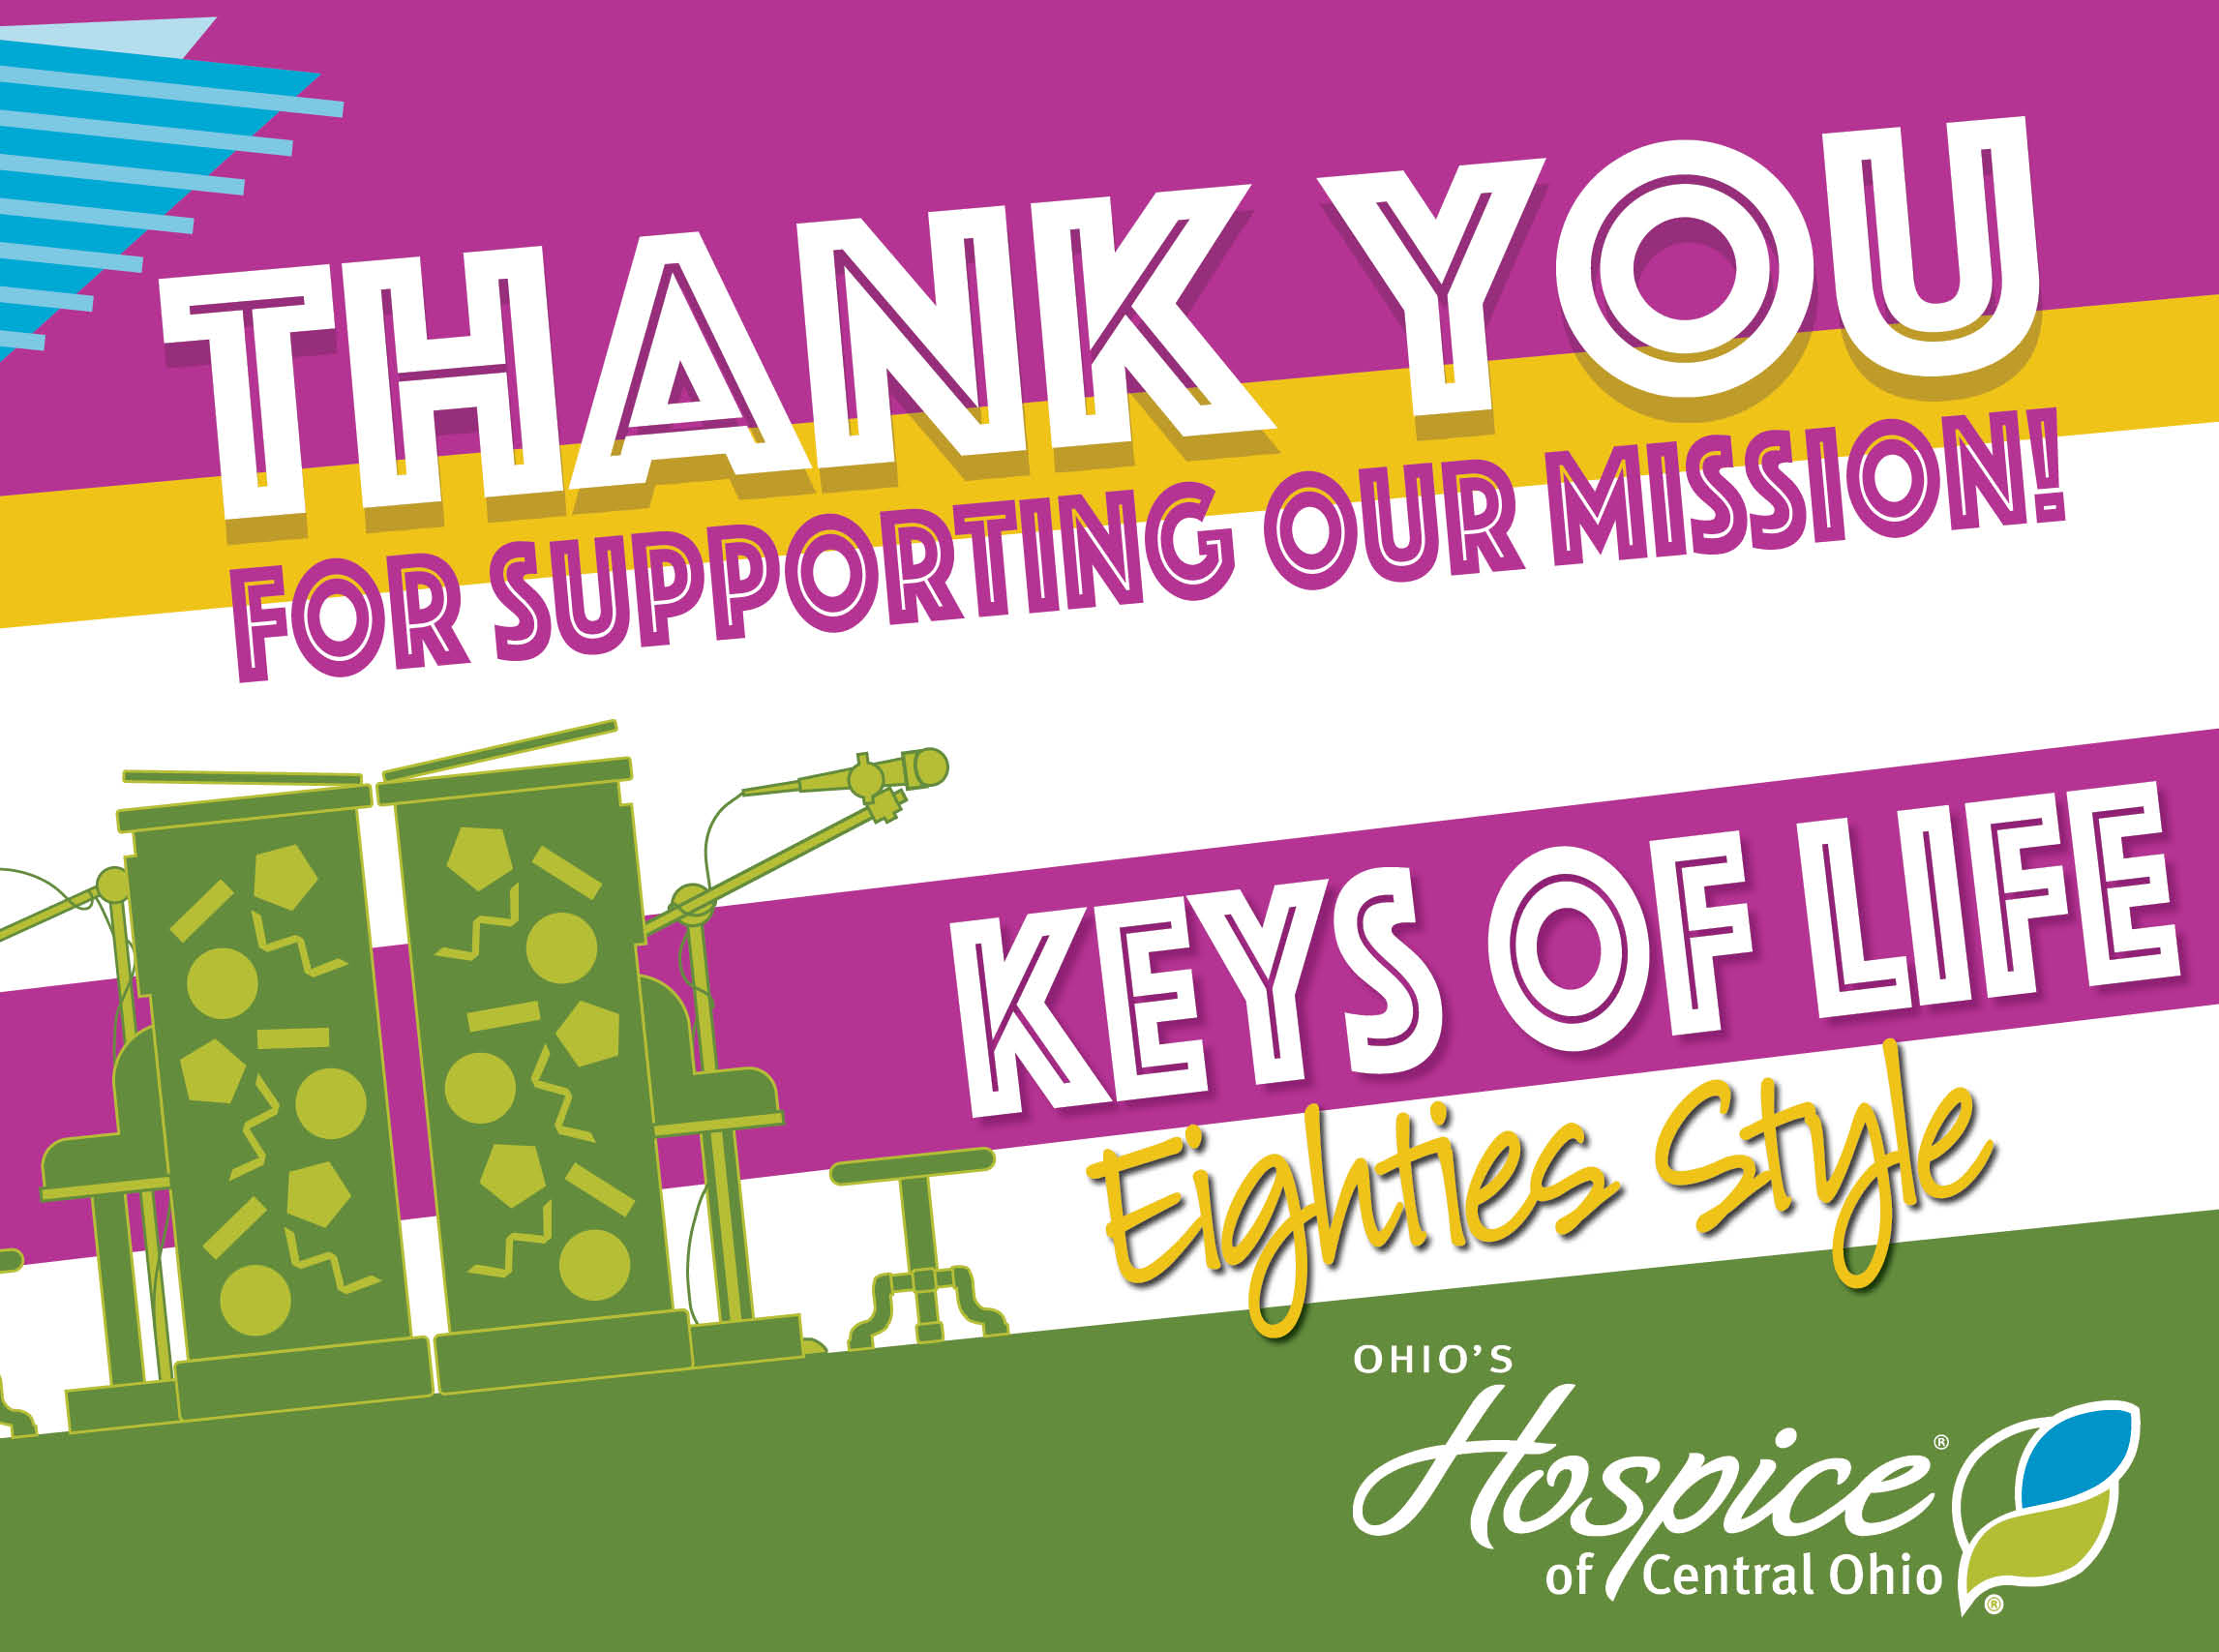 Thank you for supporting our mission! Keys of Life: Eighties Style